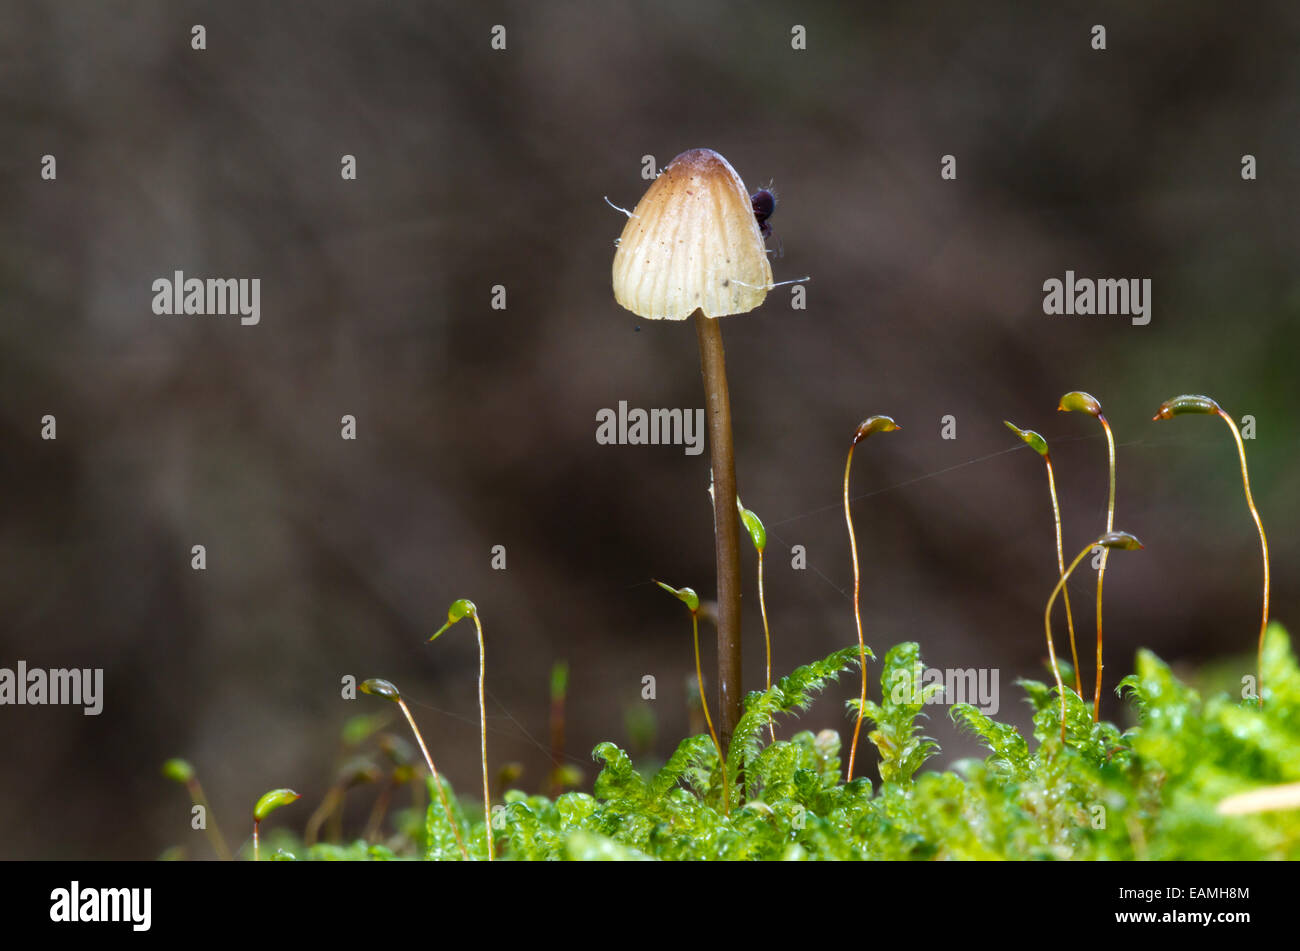 Tiny mushroom, a Mycena, with a little spider on top, growing between flowering moss Stock Photo